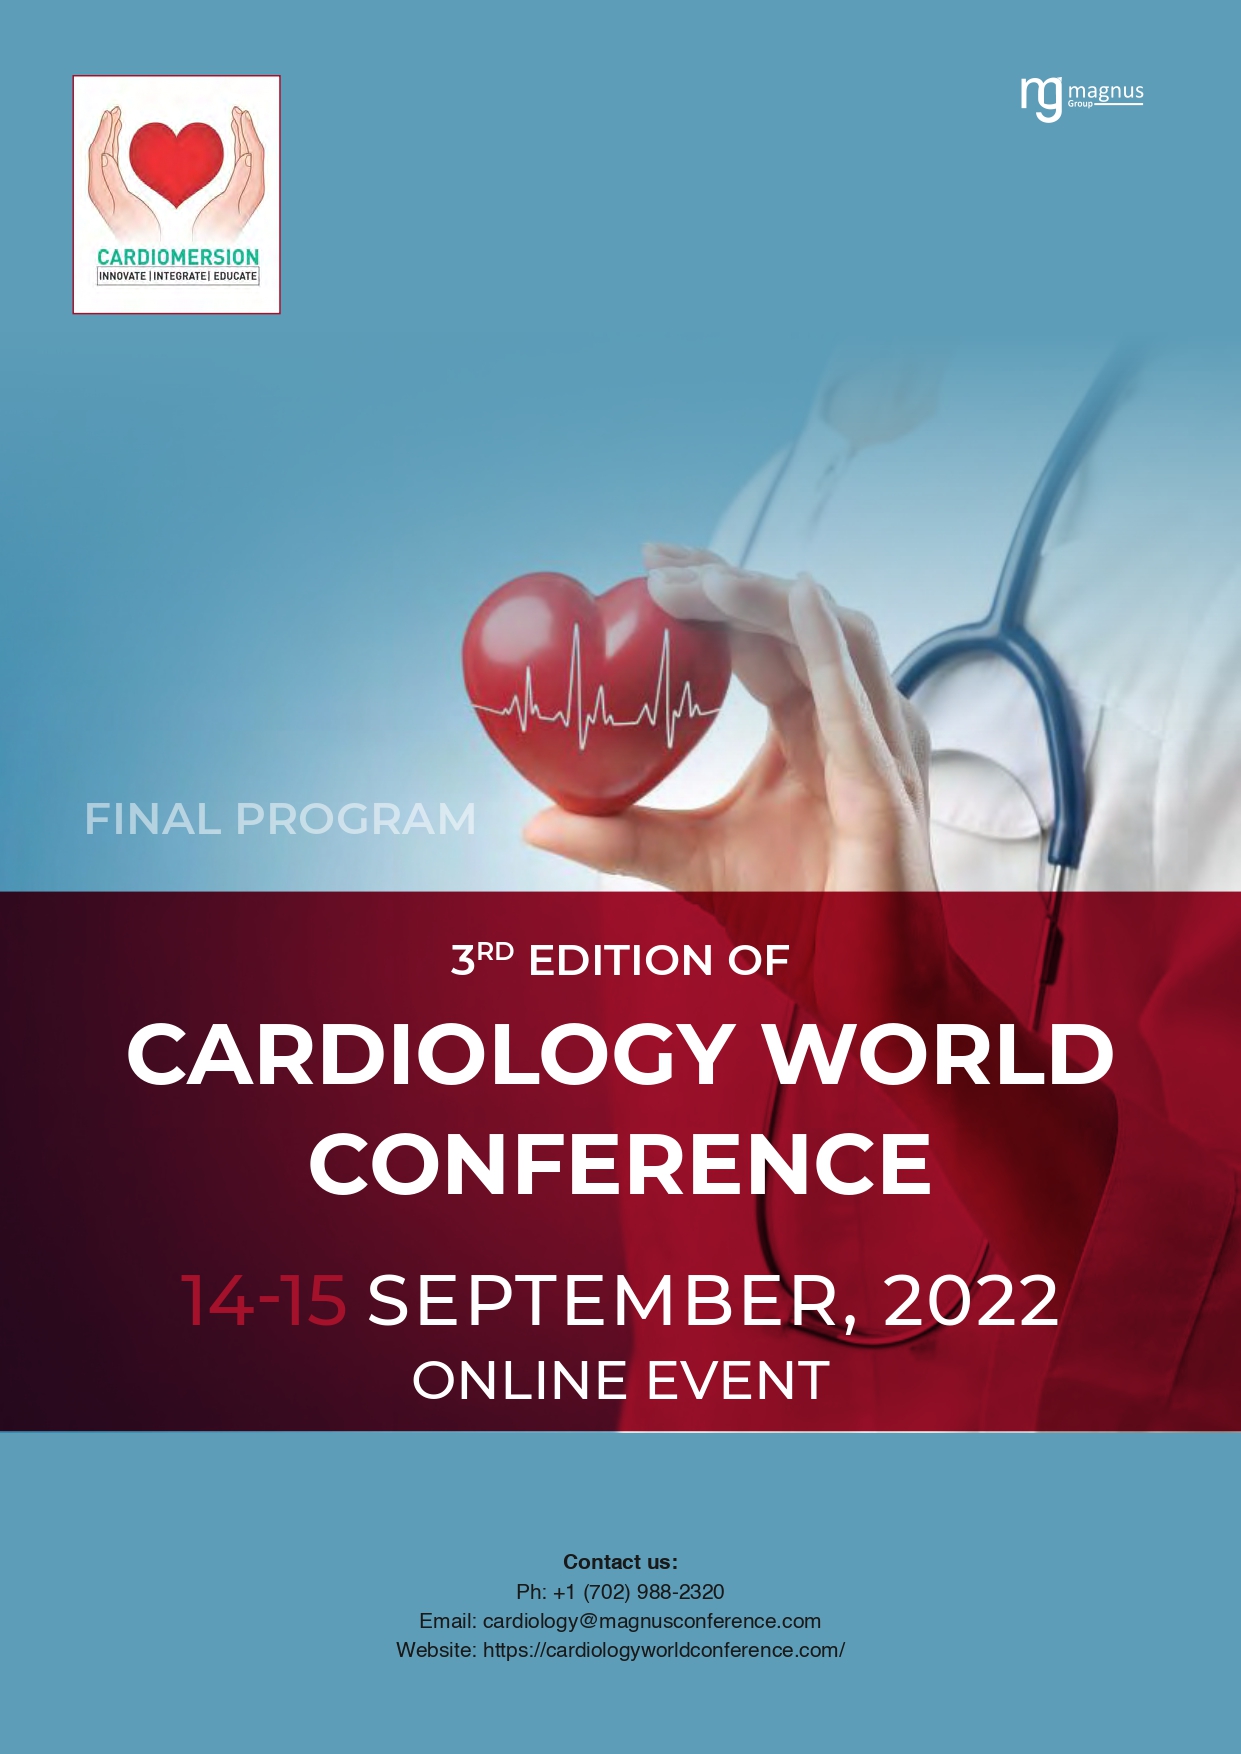 3rd Edition of Cardiology World Conference | Online Event Program